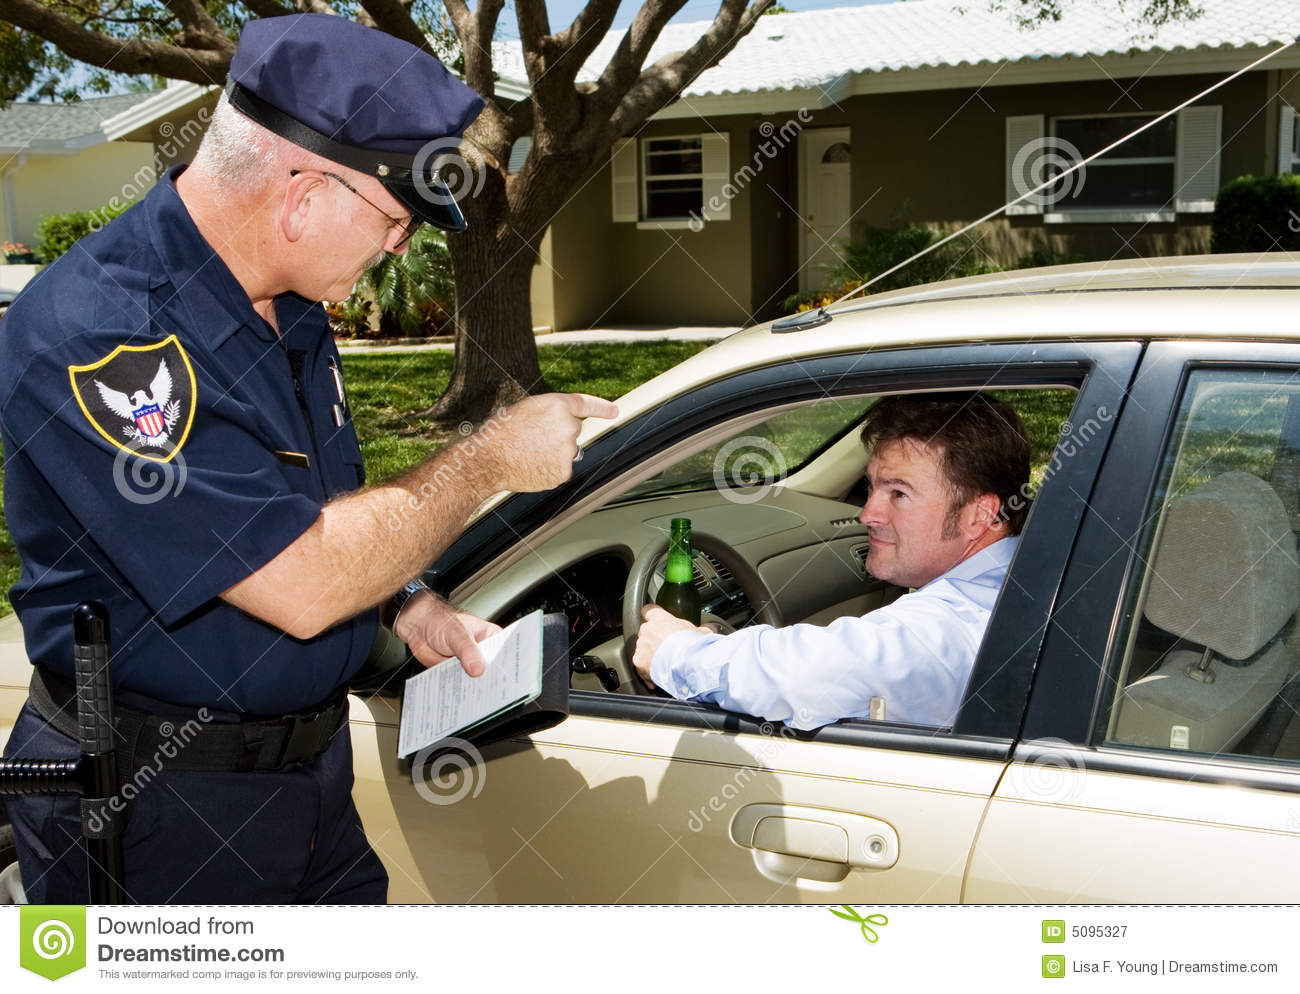 Police   Drunk Driving Royalty Free Stock Photography   Image  5095327